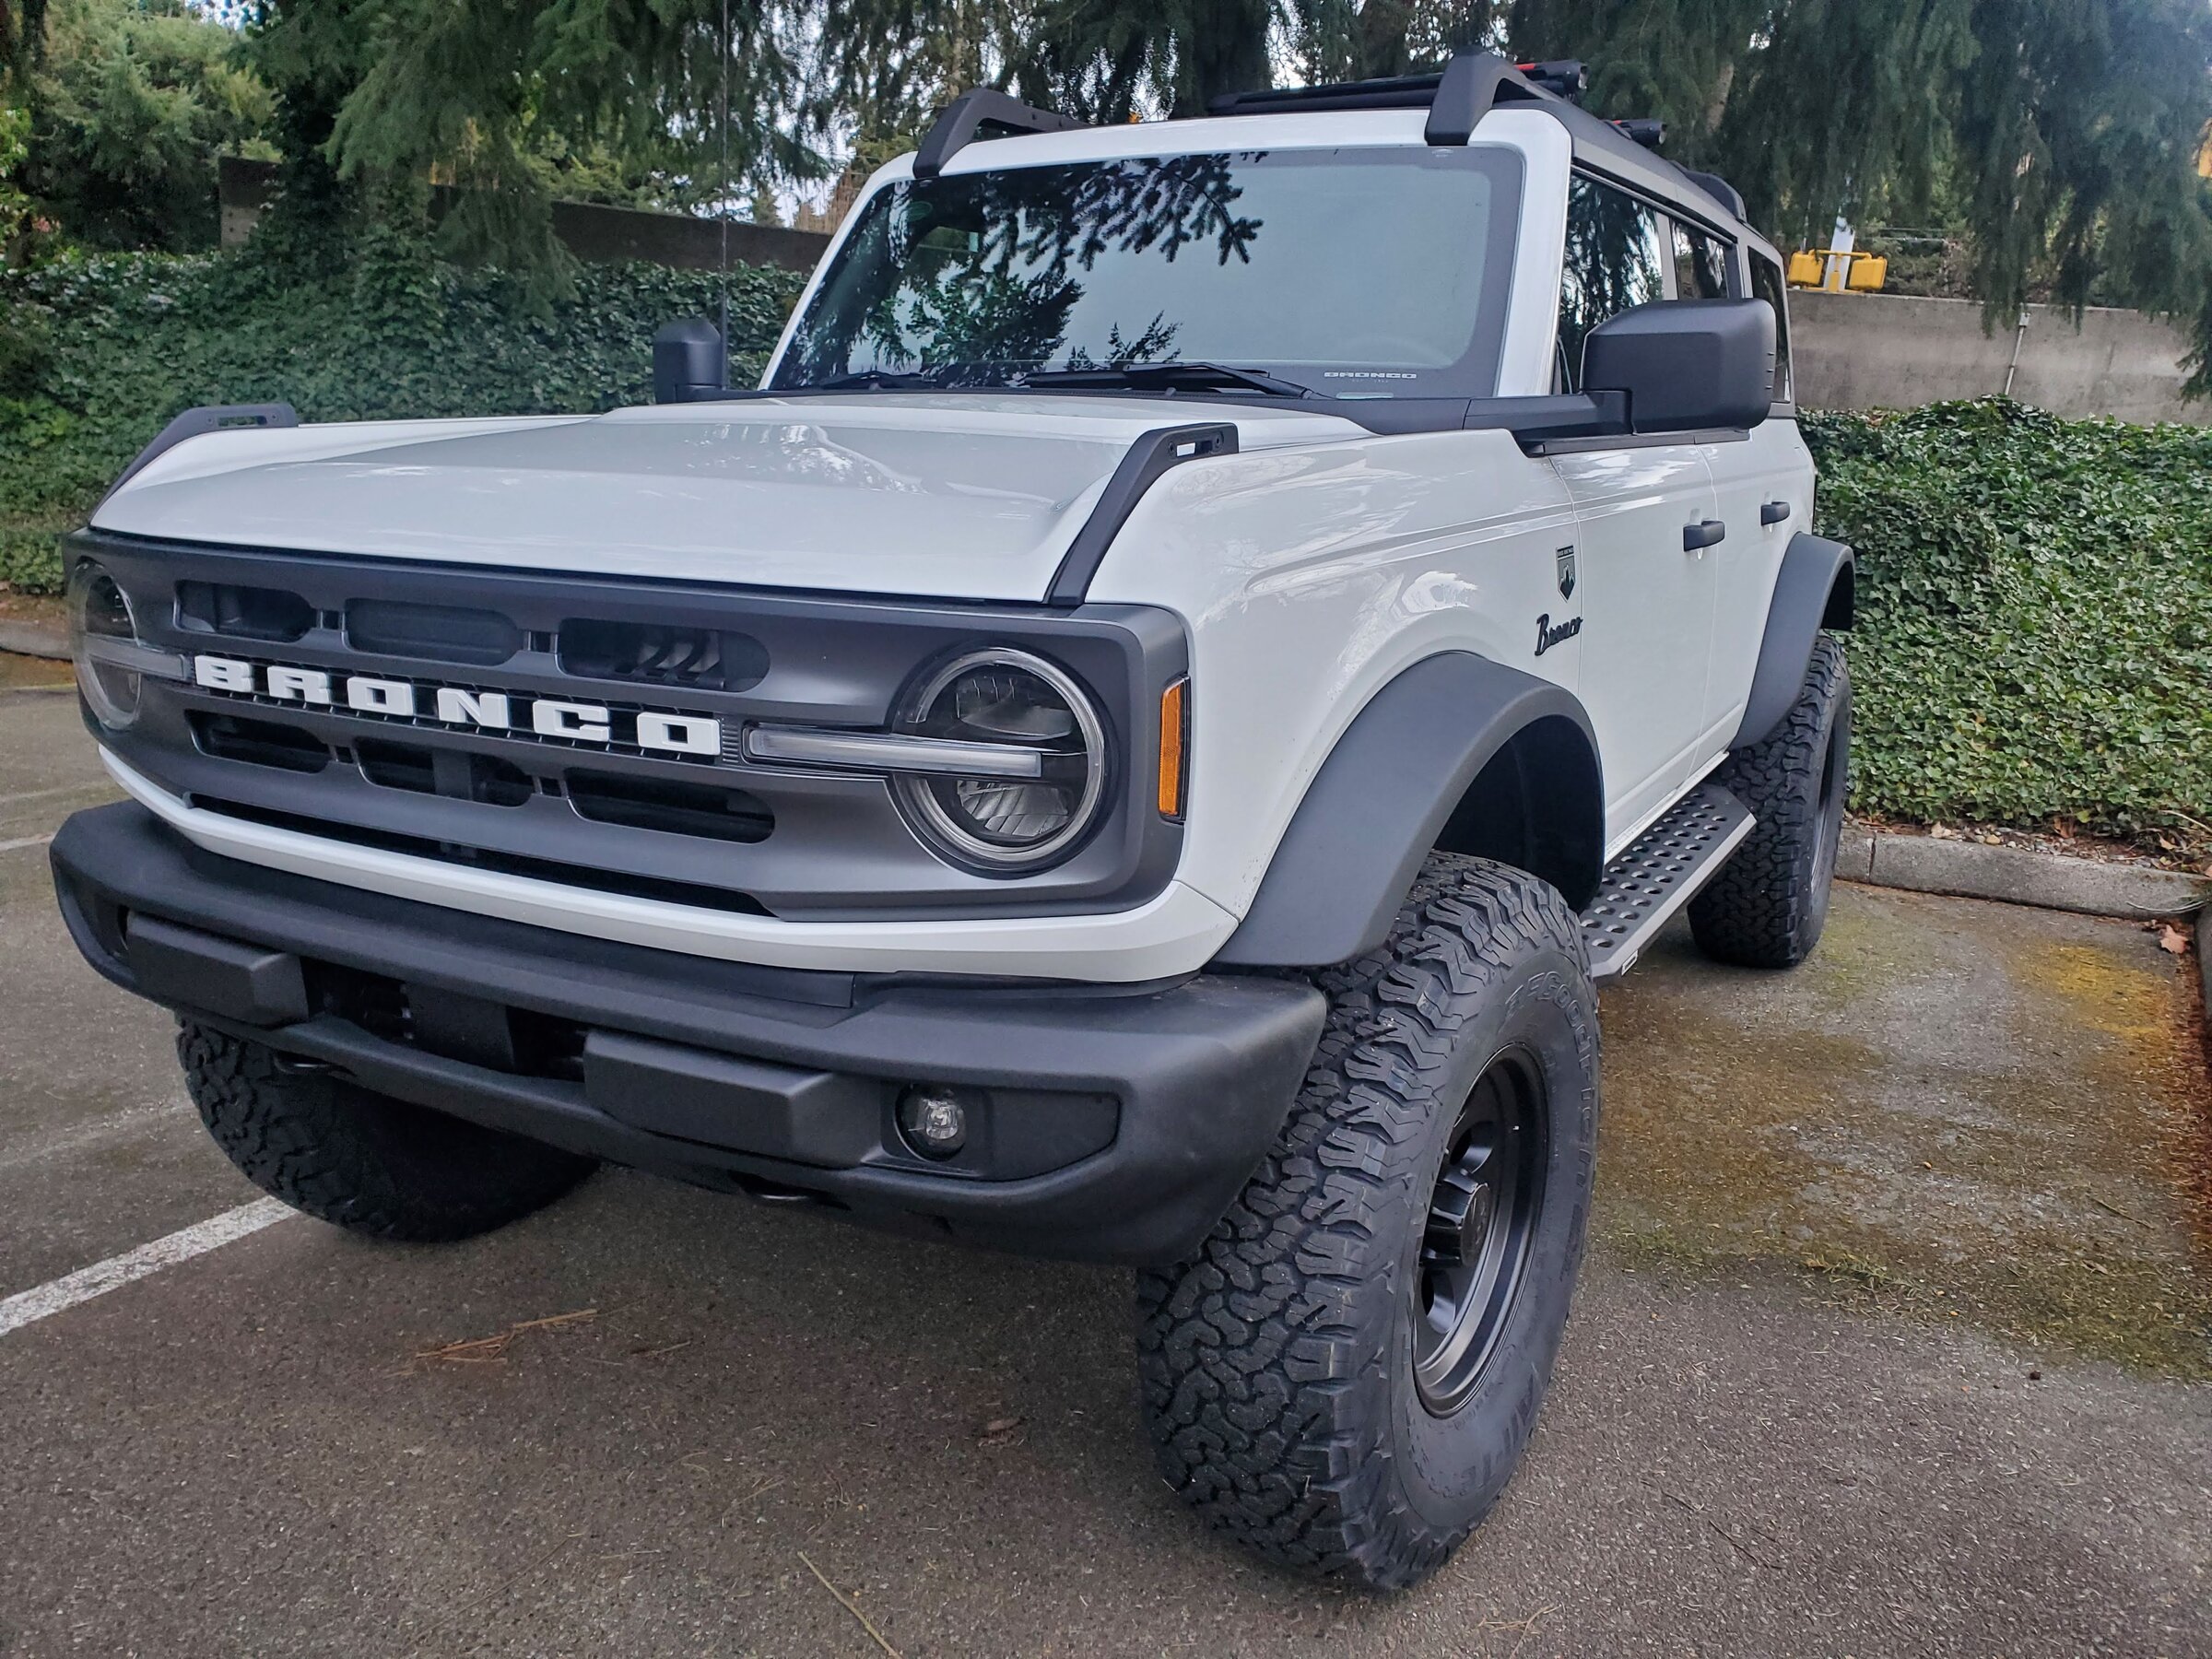 Ford Bronco Sasquatch fender flares before and after 20220412_071014